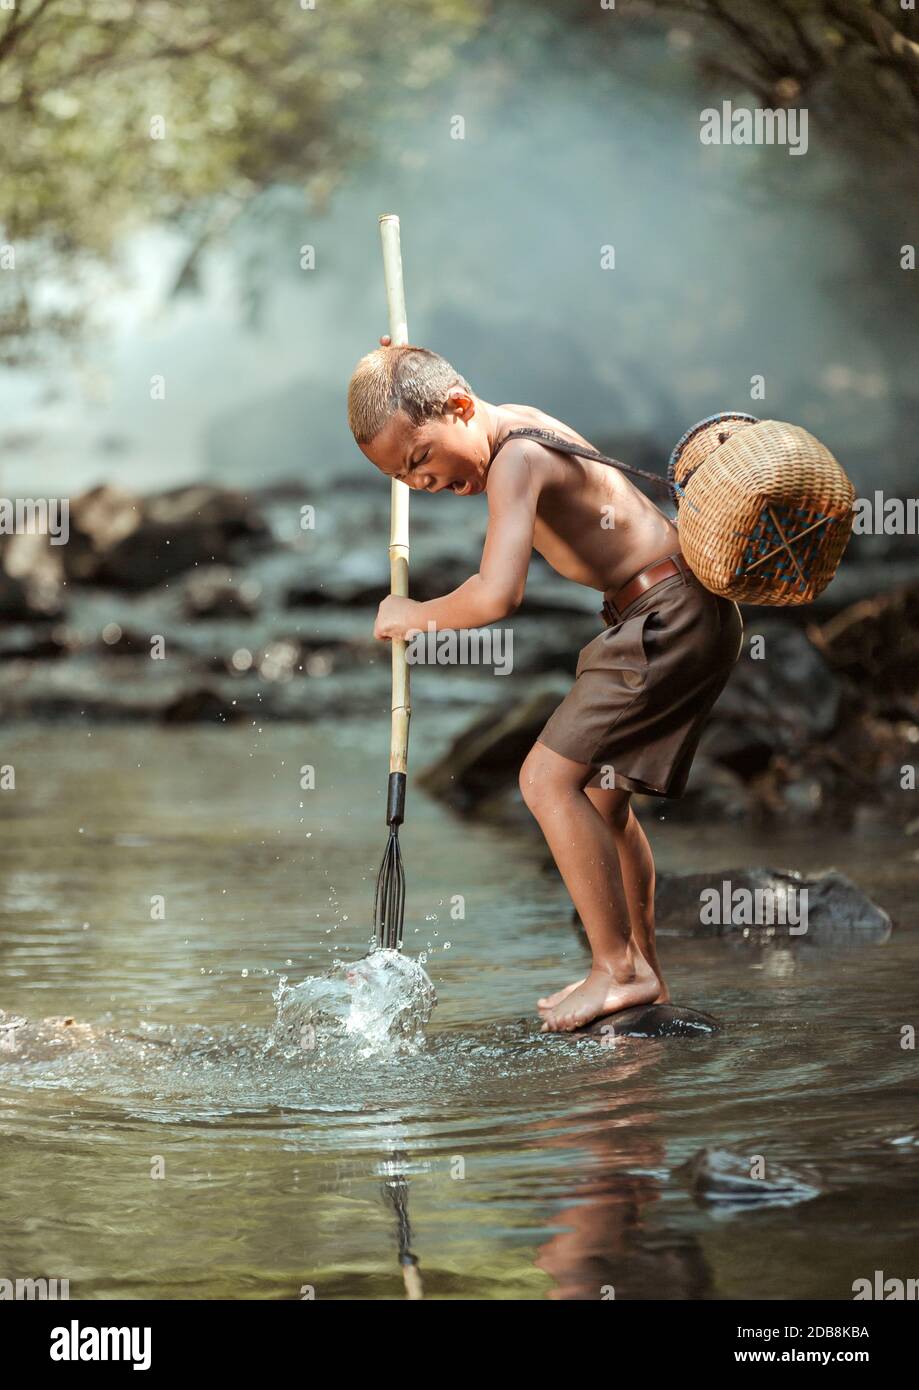 Boy standing on a rock in a river fishing, Thailand Stock Photo